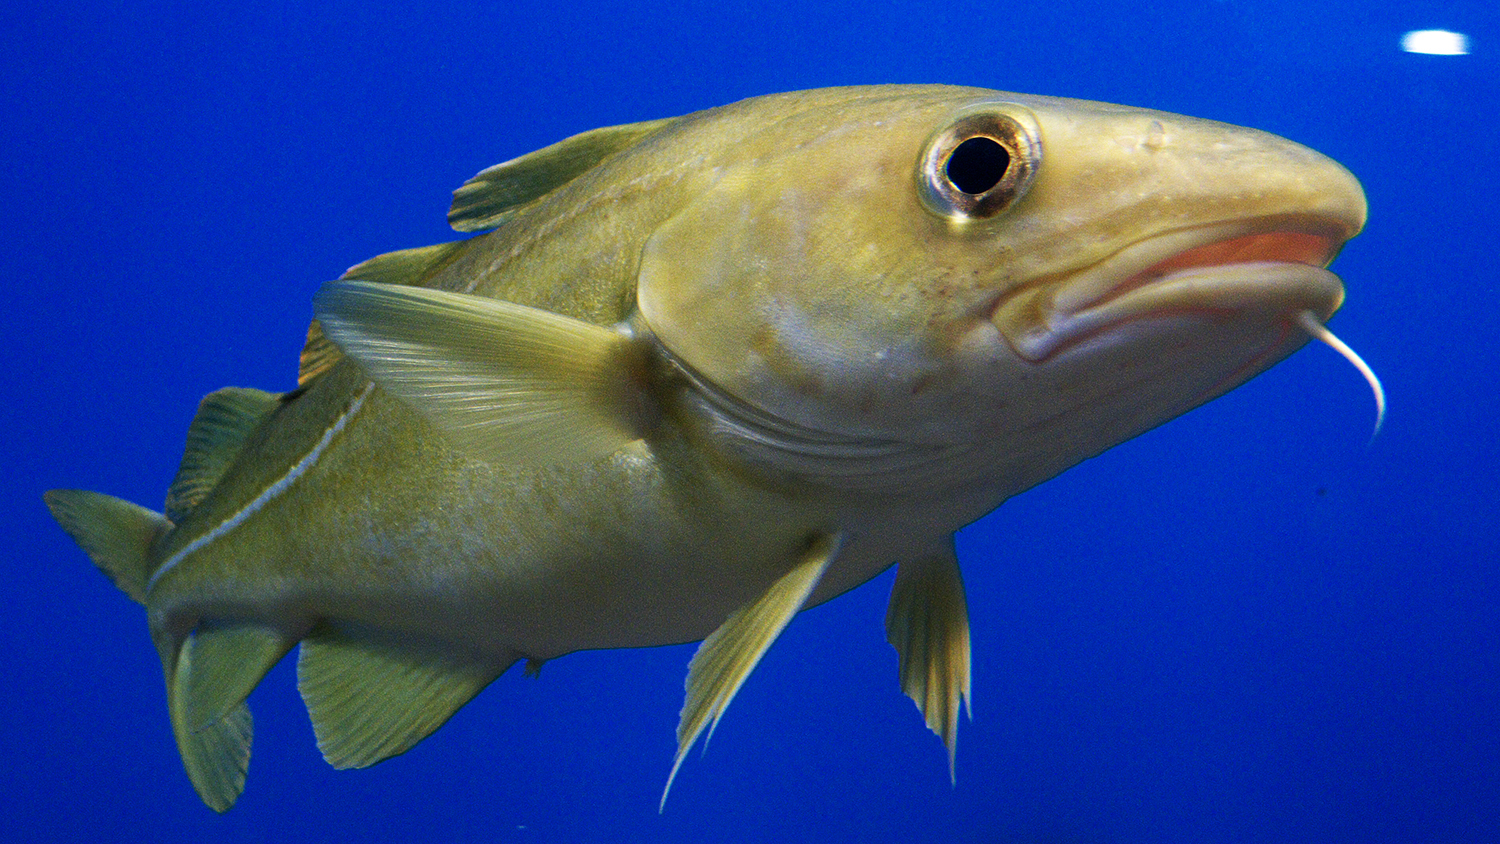 New research suggests cod, New England’s founding fish, may be returning to local waters